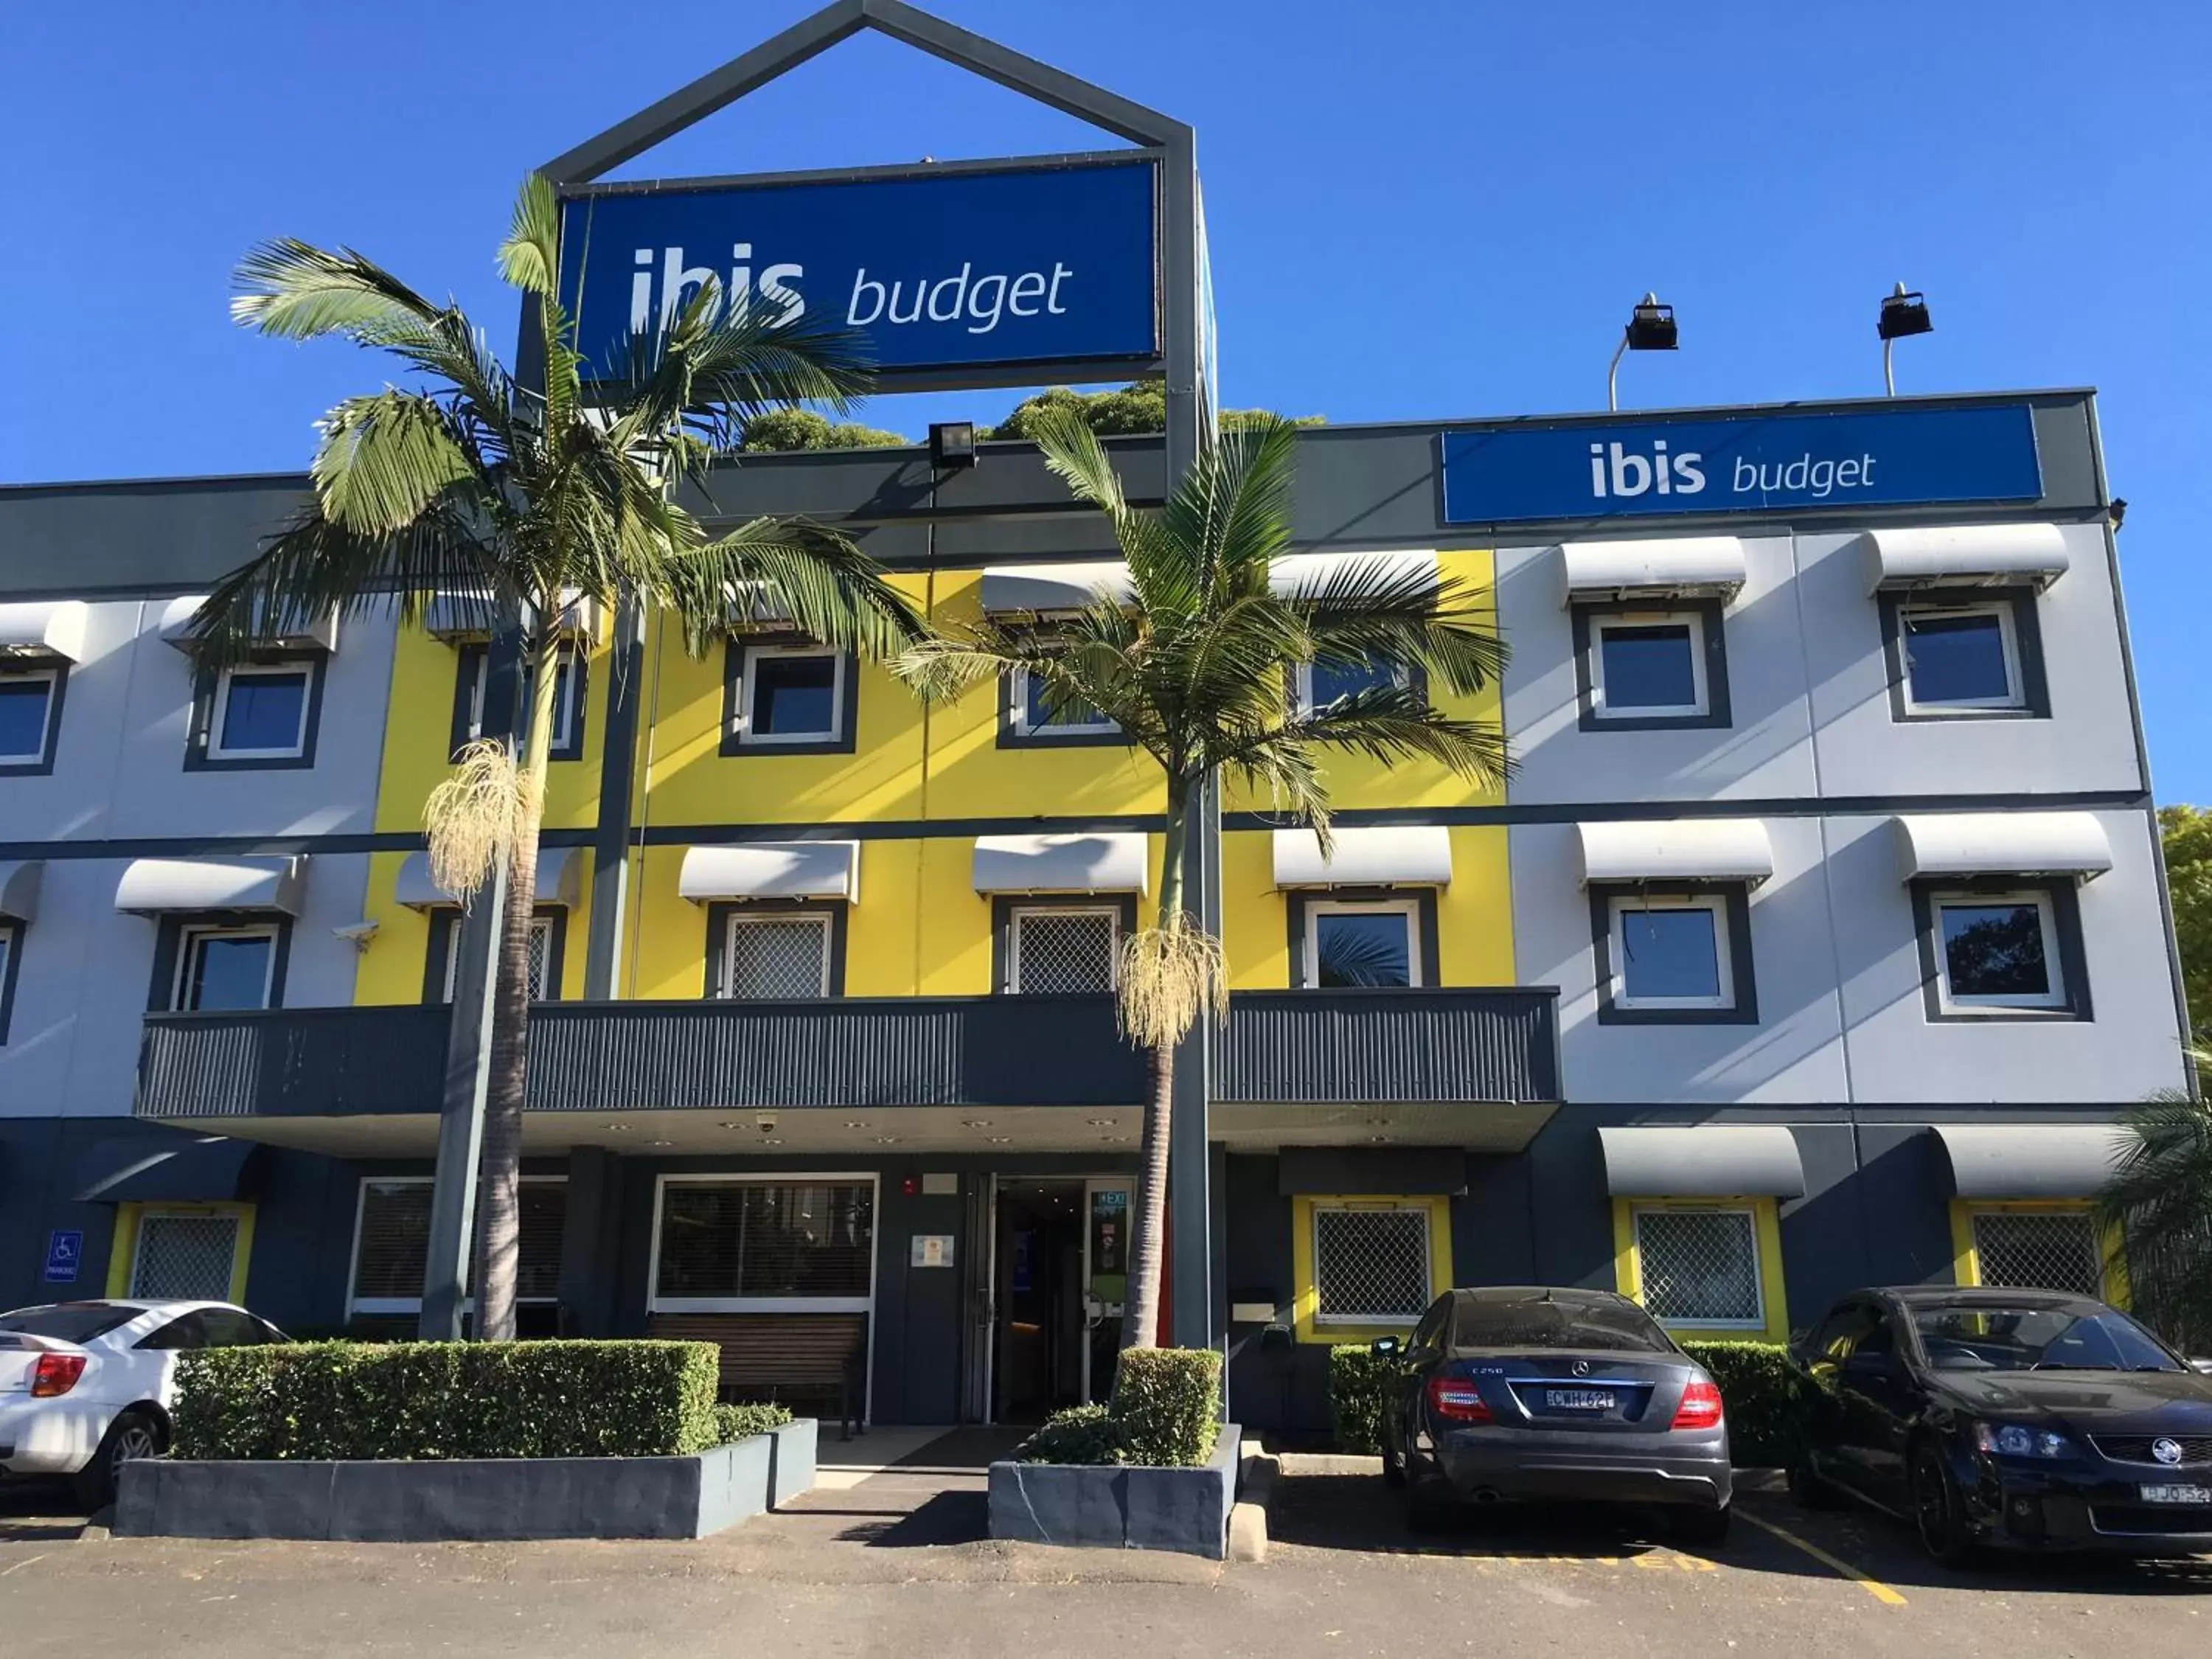 Property Building in ibis Budget - Enfield